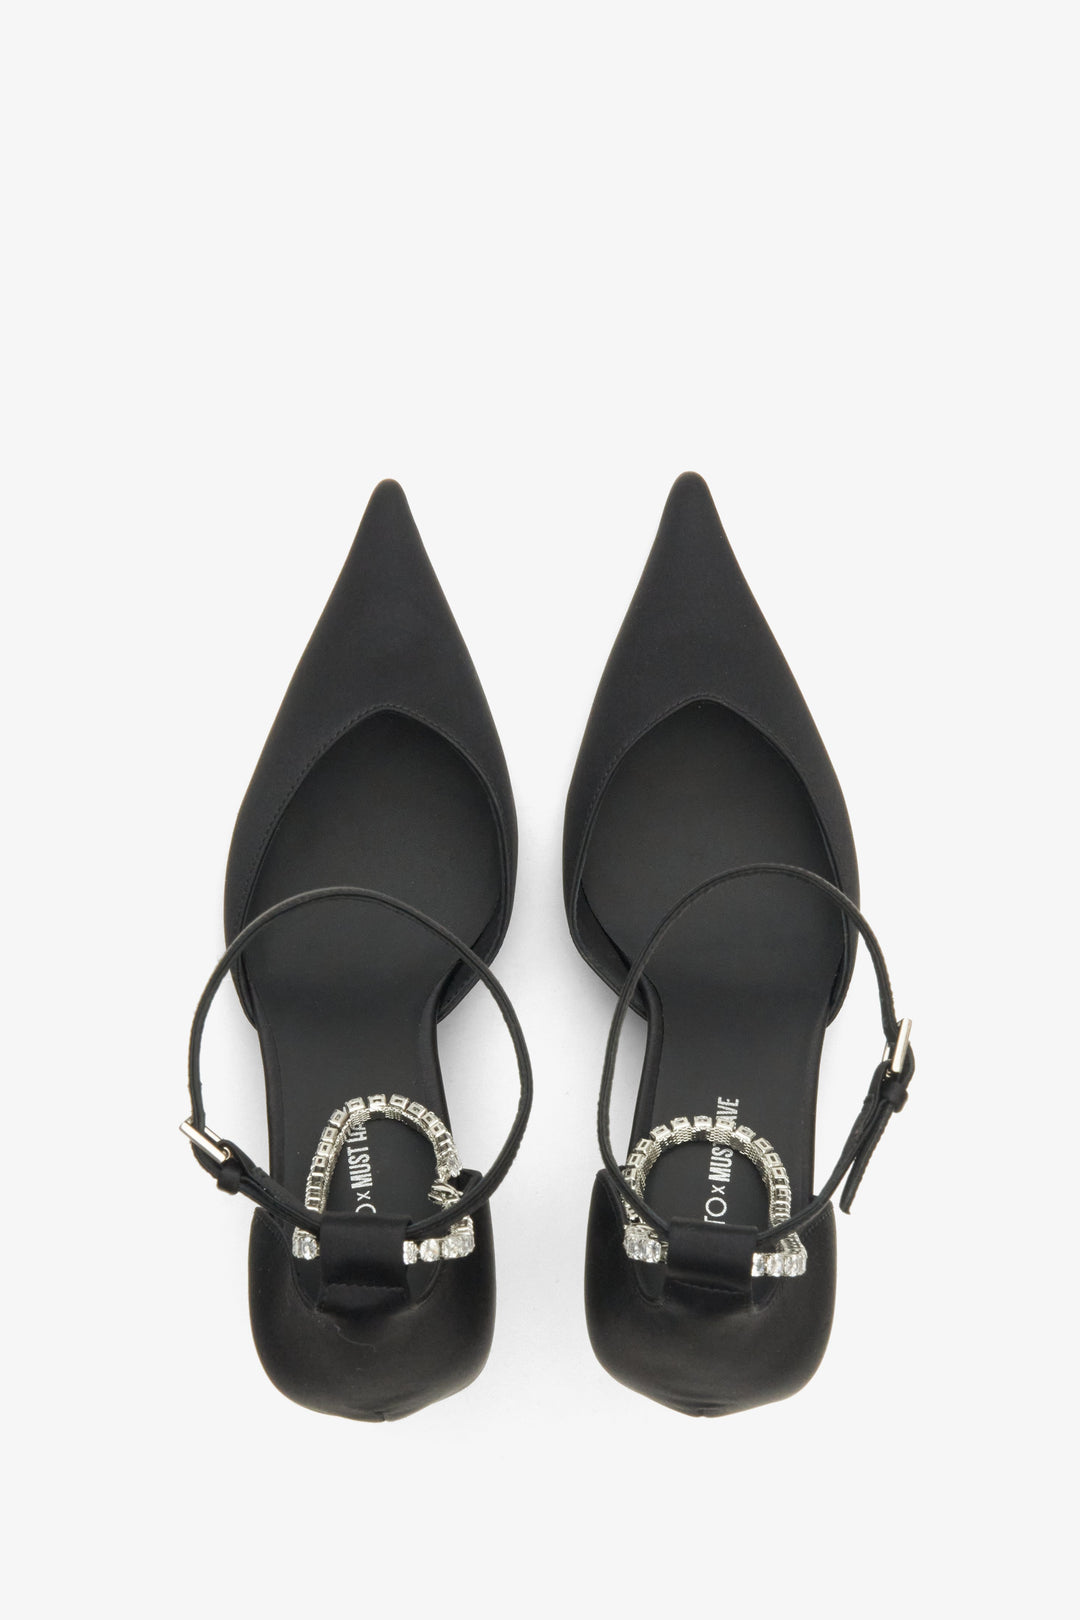 Women's pointed-toe pumps in black with a crystal strap - top view presentation of the model.